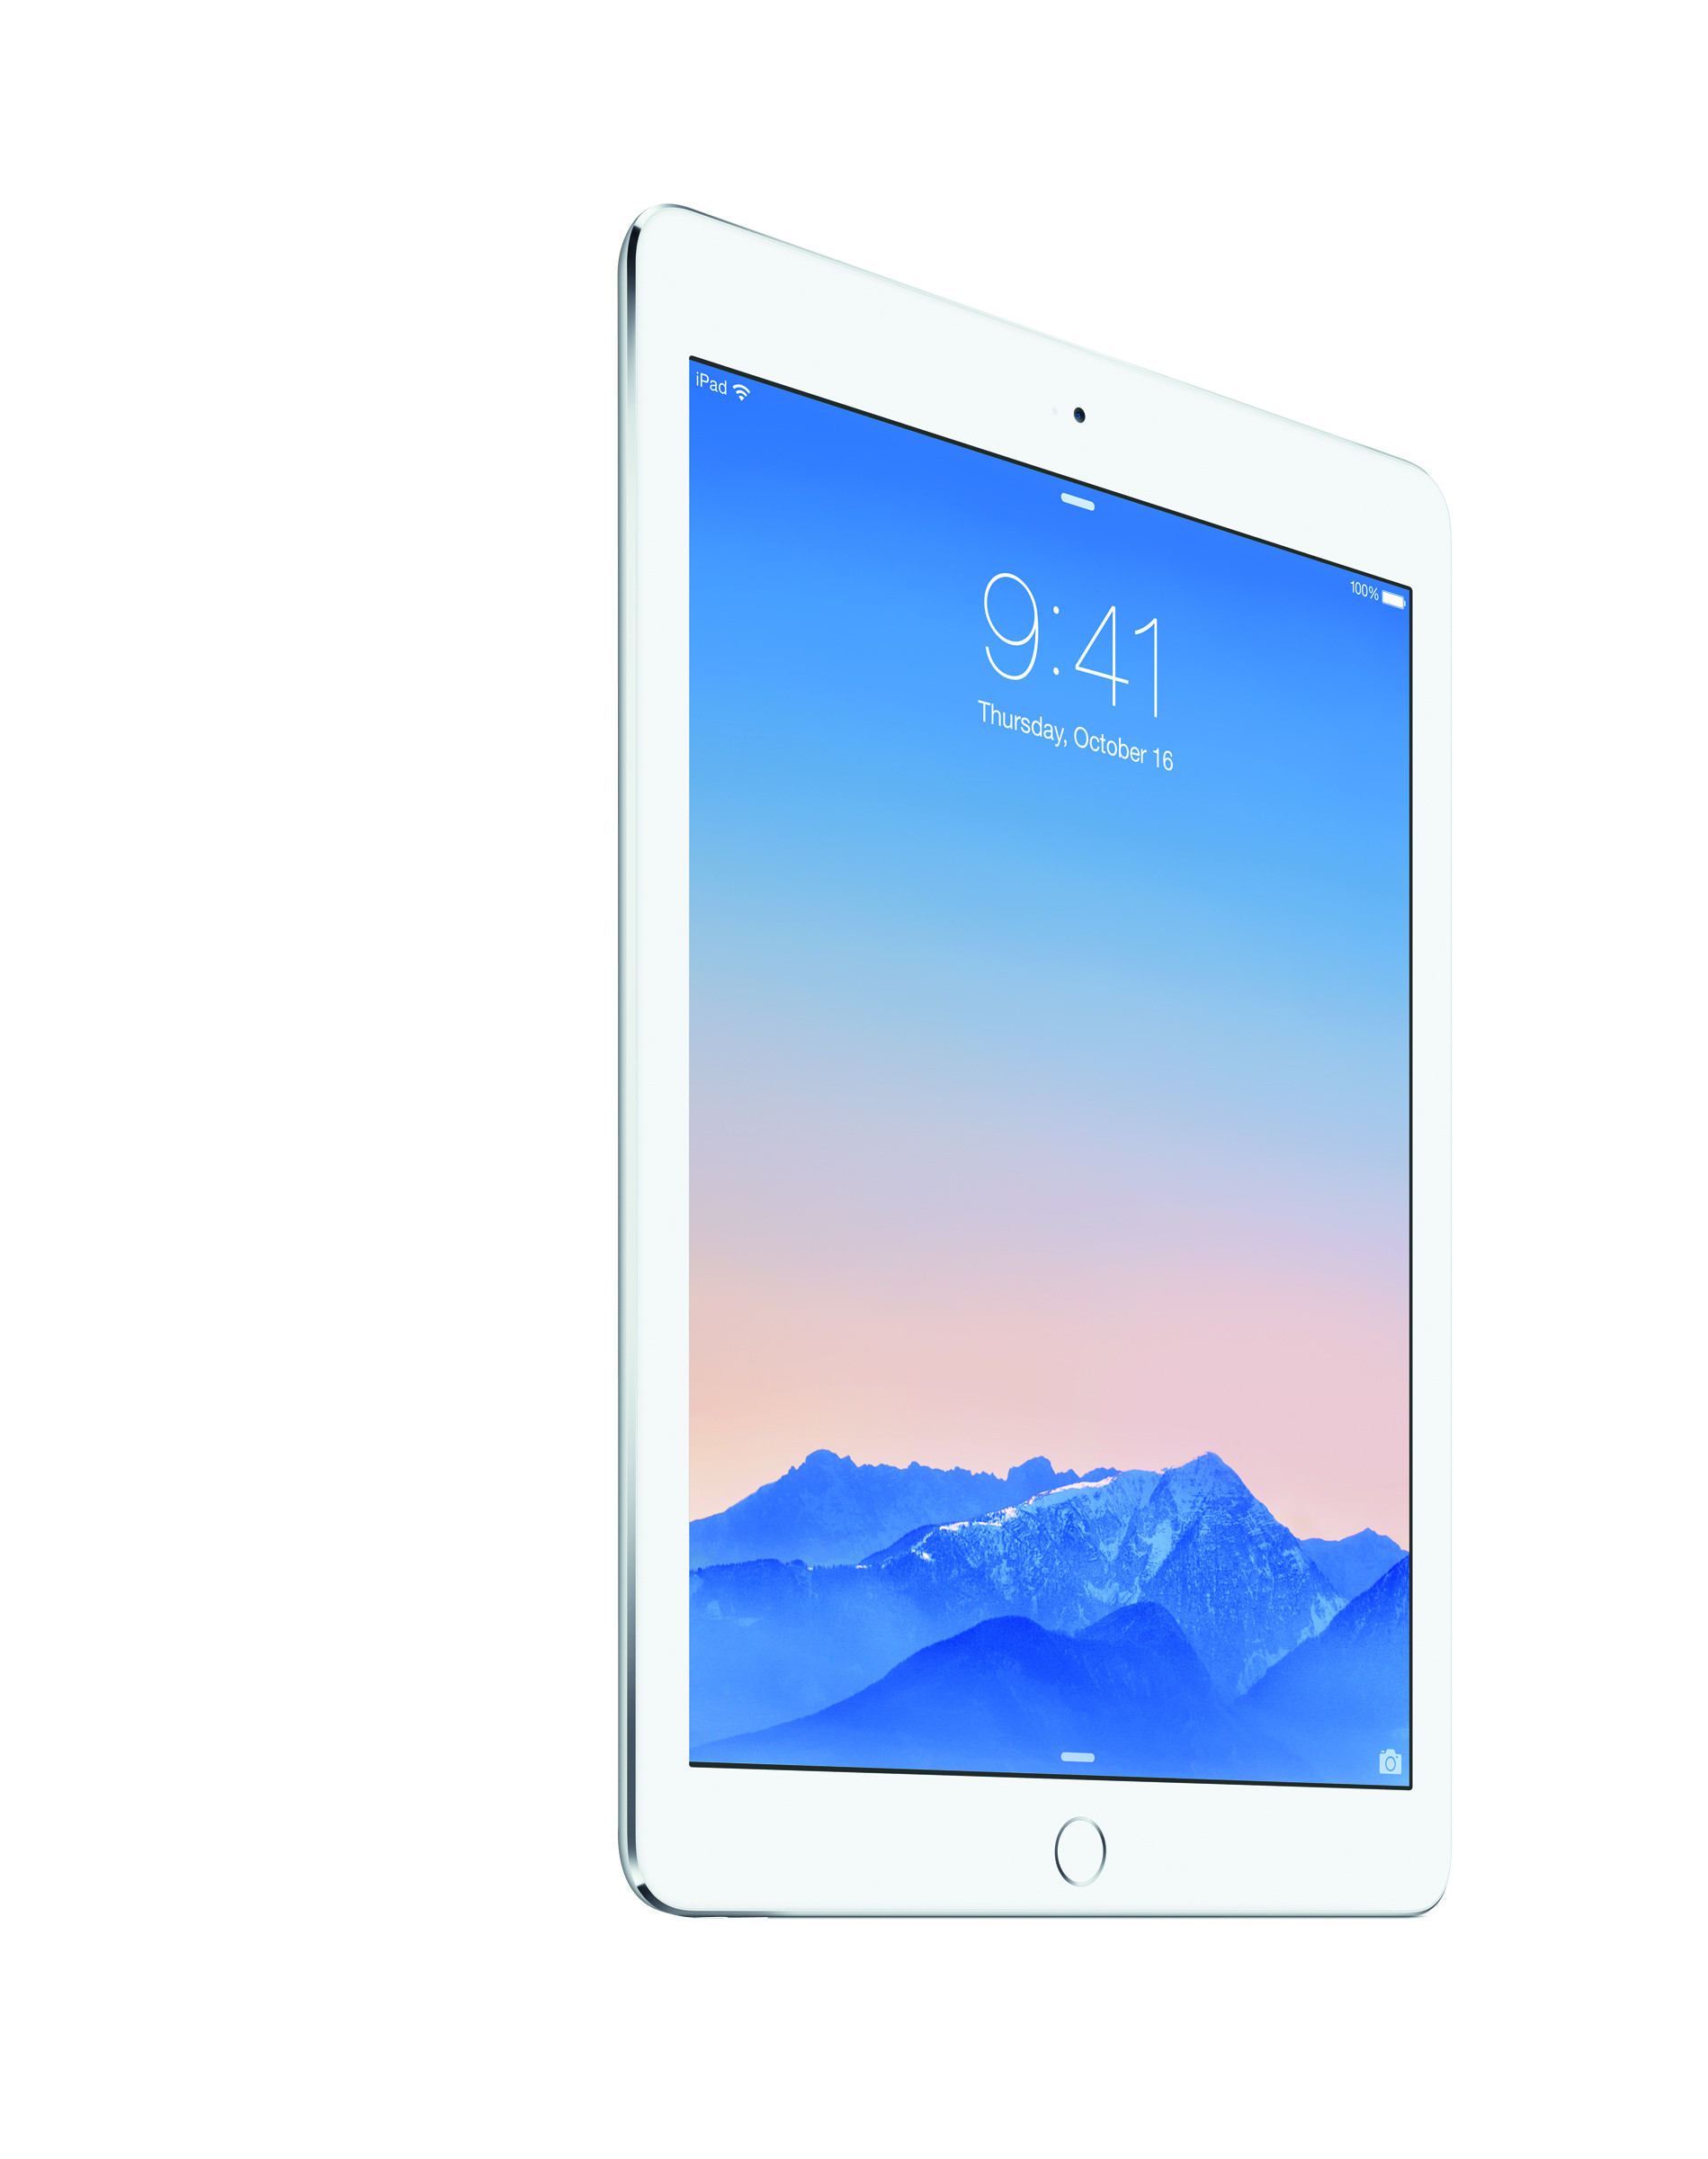 Restored Apple iPad Air 2 Wi-Fi - 2nd generation - tablet - 64 GB - 9.7" IPS (2048 x 1536) - silver (Refurbished) - image 3 of 8